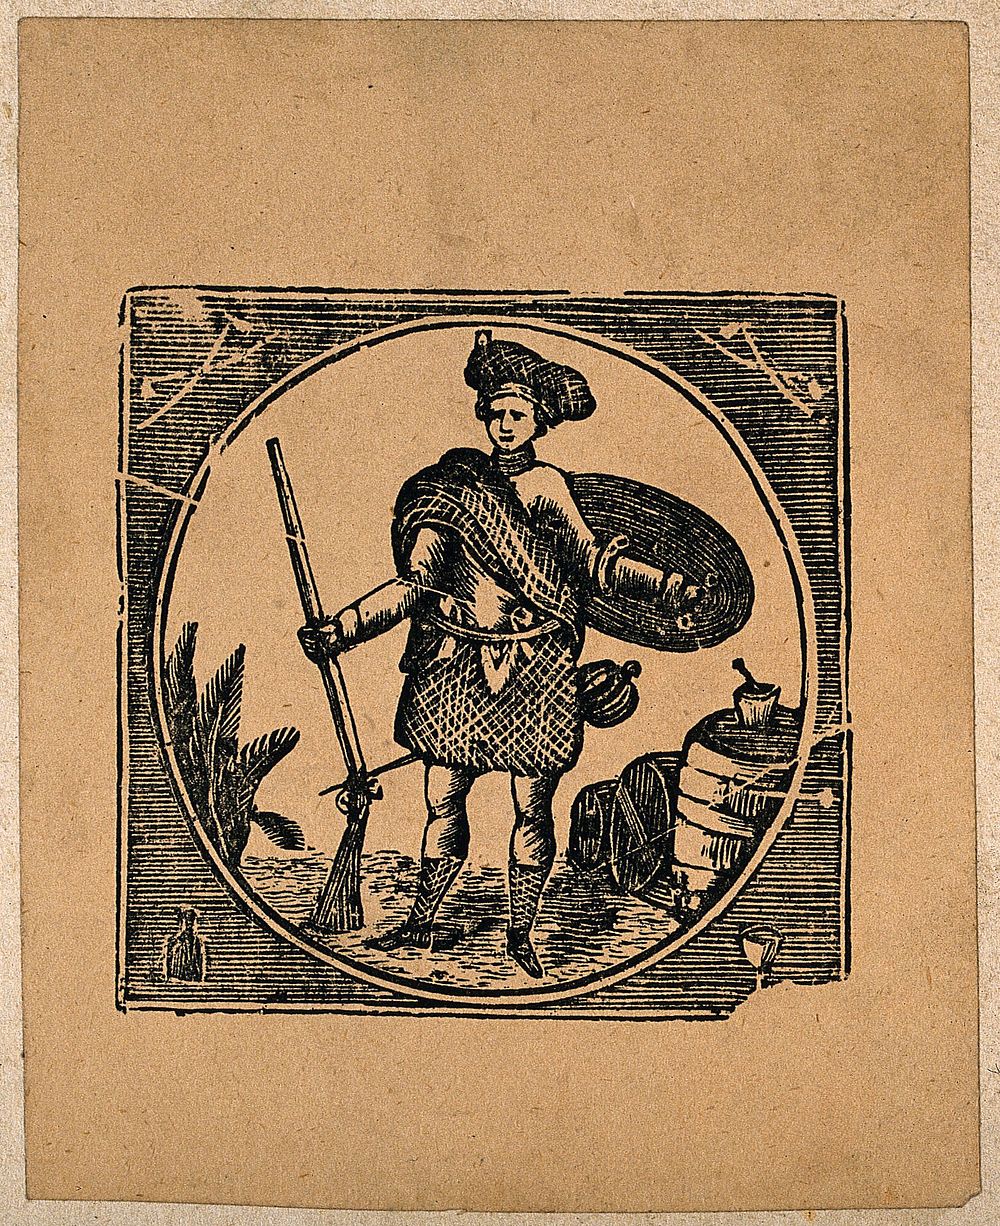 A Scotsman with a rifle, sword and shield guarding barrels (of tobacco). Wood-engraving, mid-19th century.